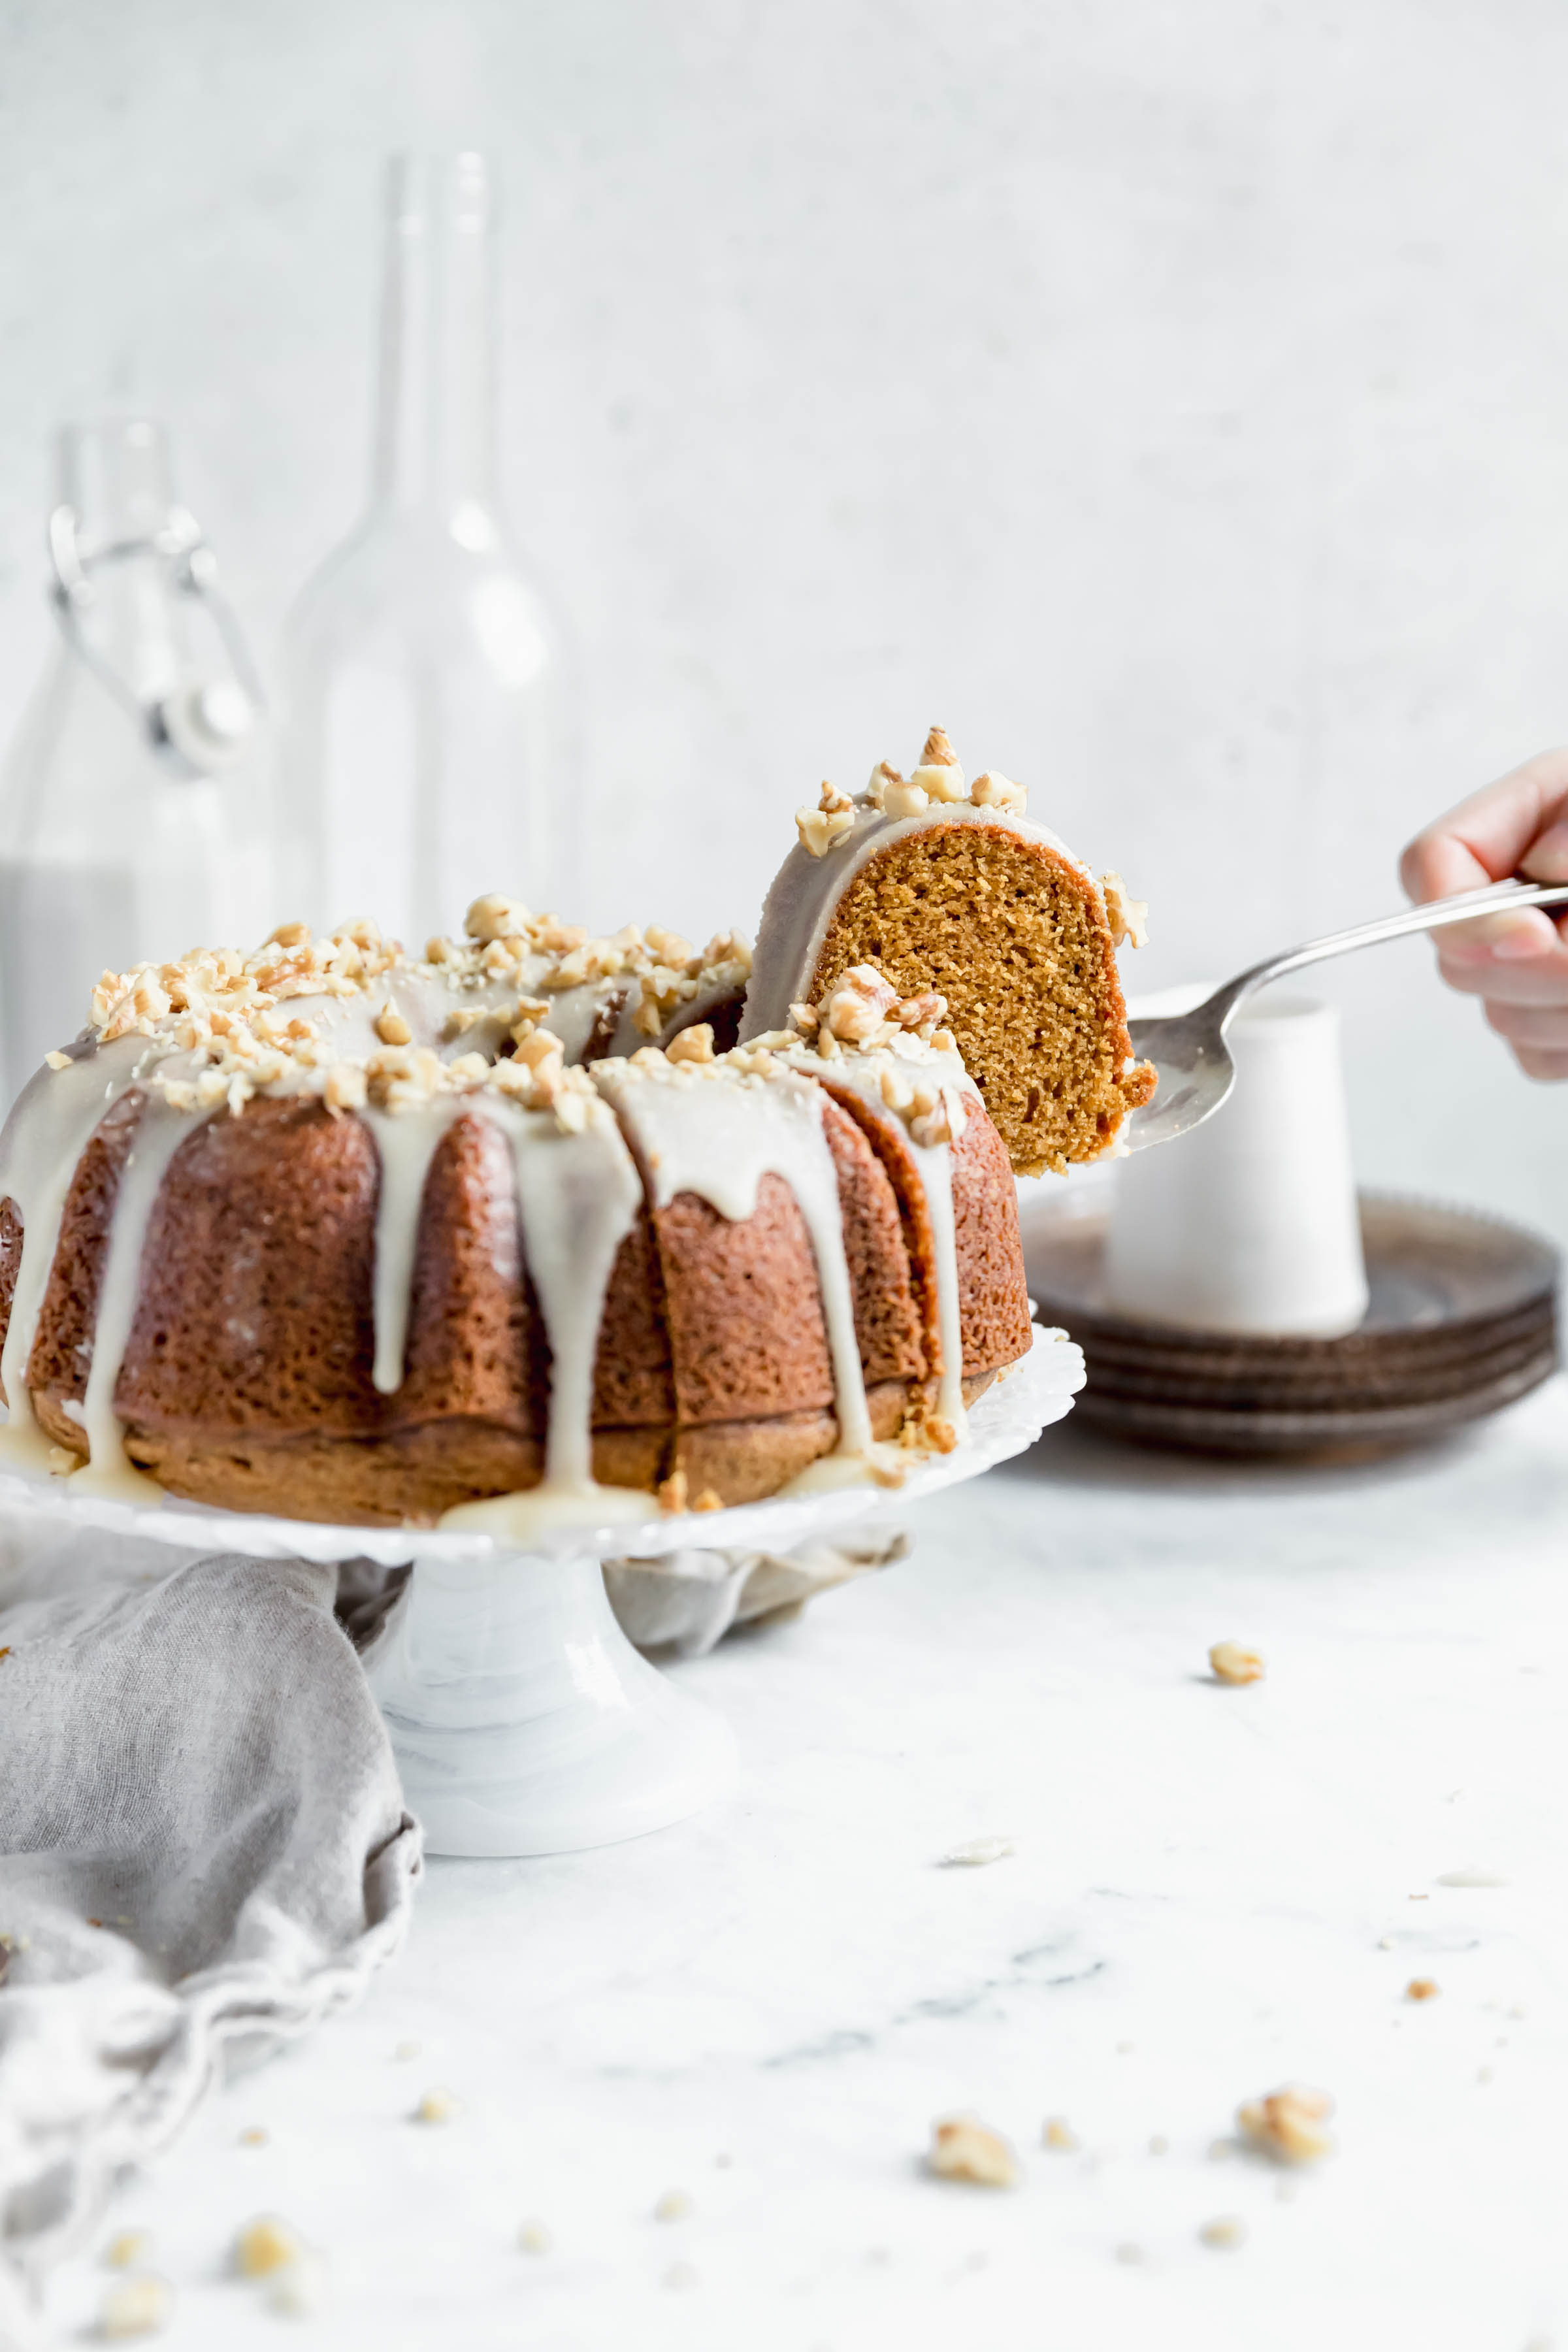 This maple sweet potato bundt cake has the silkiest, dreamiest crumb. Perfect for this Holiday season and great for a crowd!